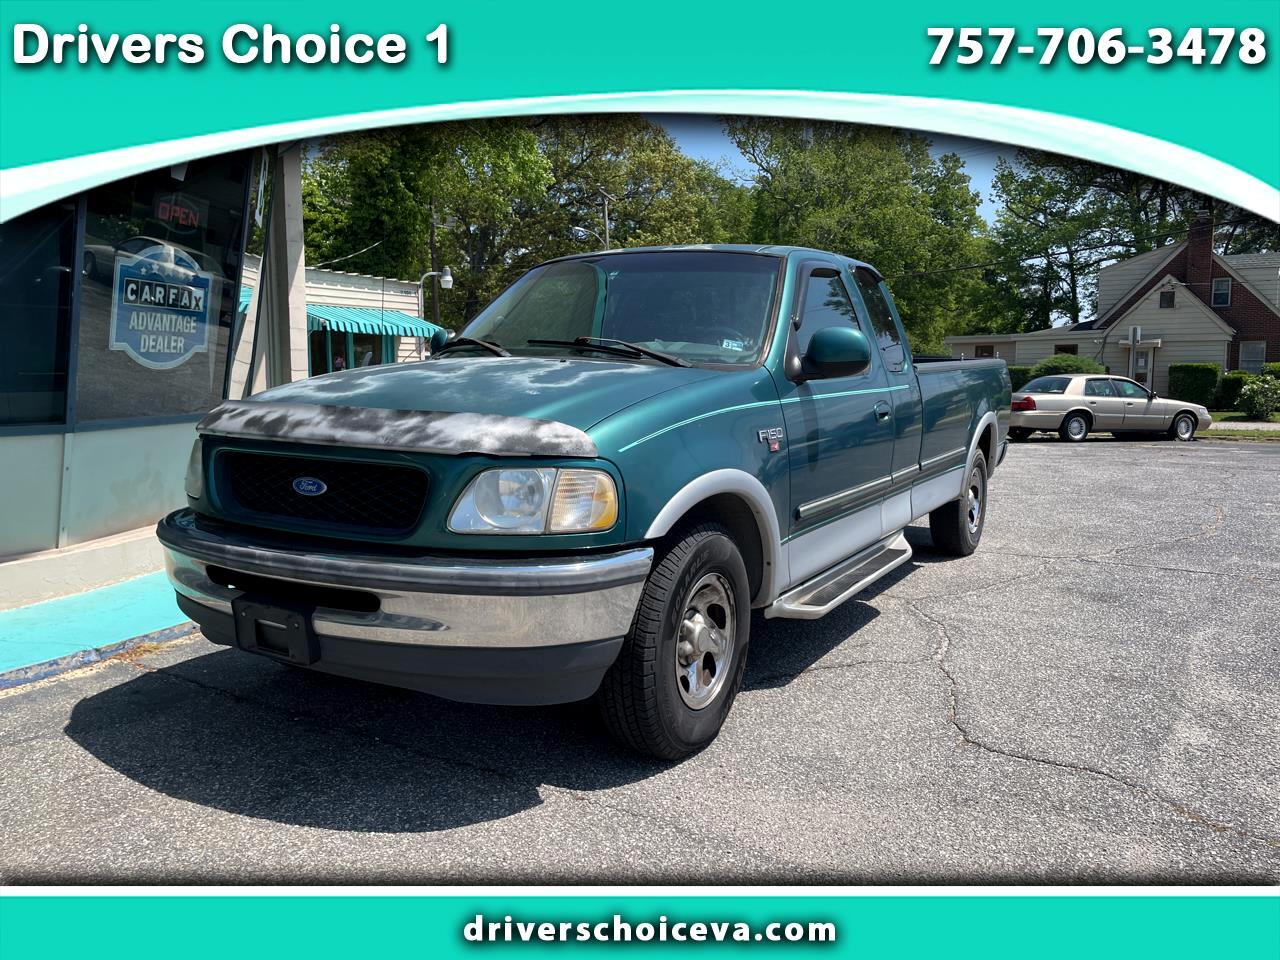 Ford F-150 Supercab 139" 1997